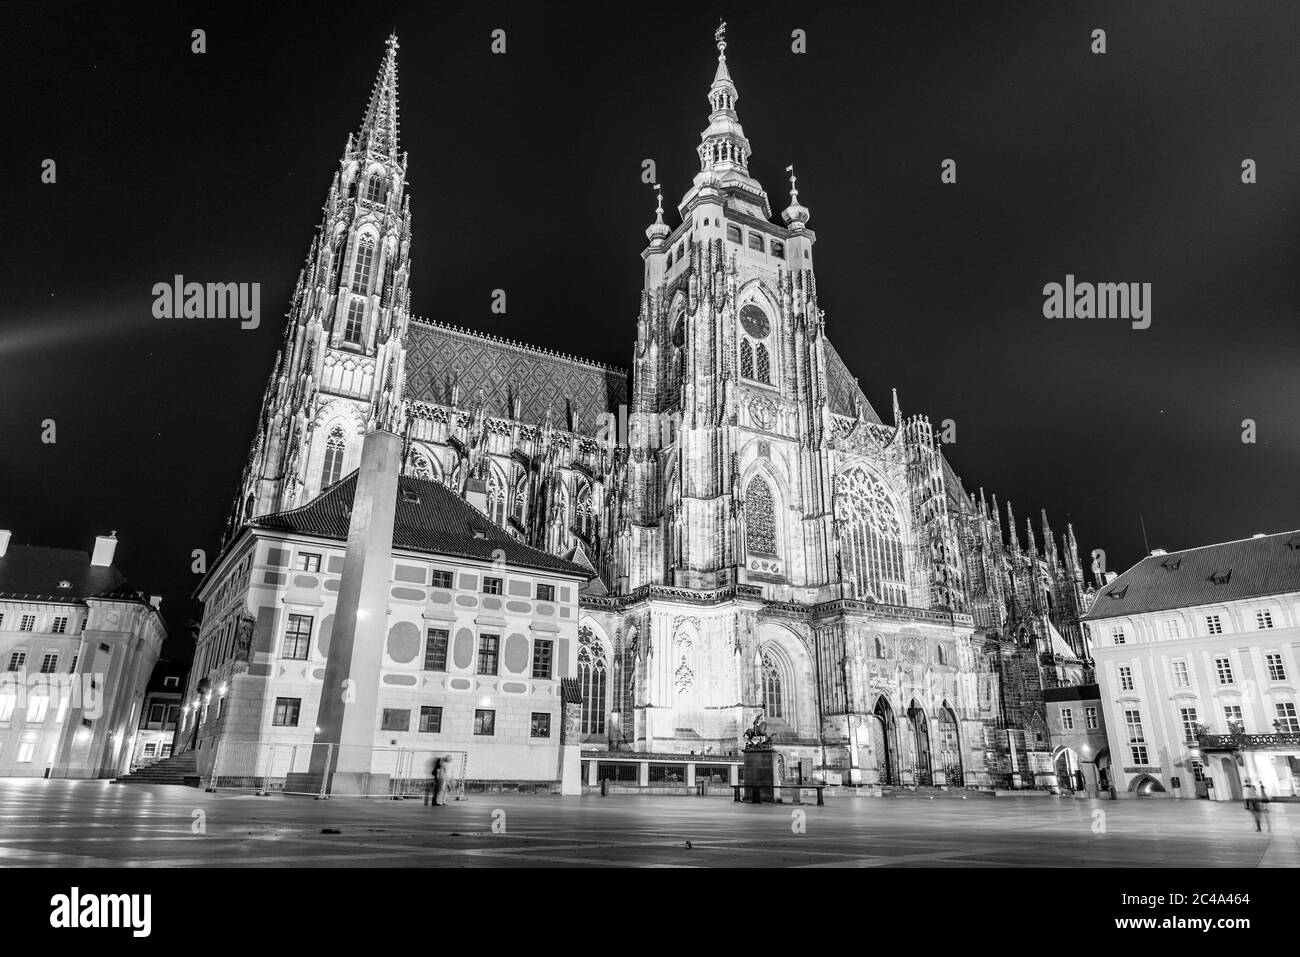 St Vitus Cathedral in Prague Castle by night, Prague, Czech Republic. Black and white image. Stock Photo